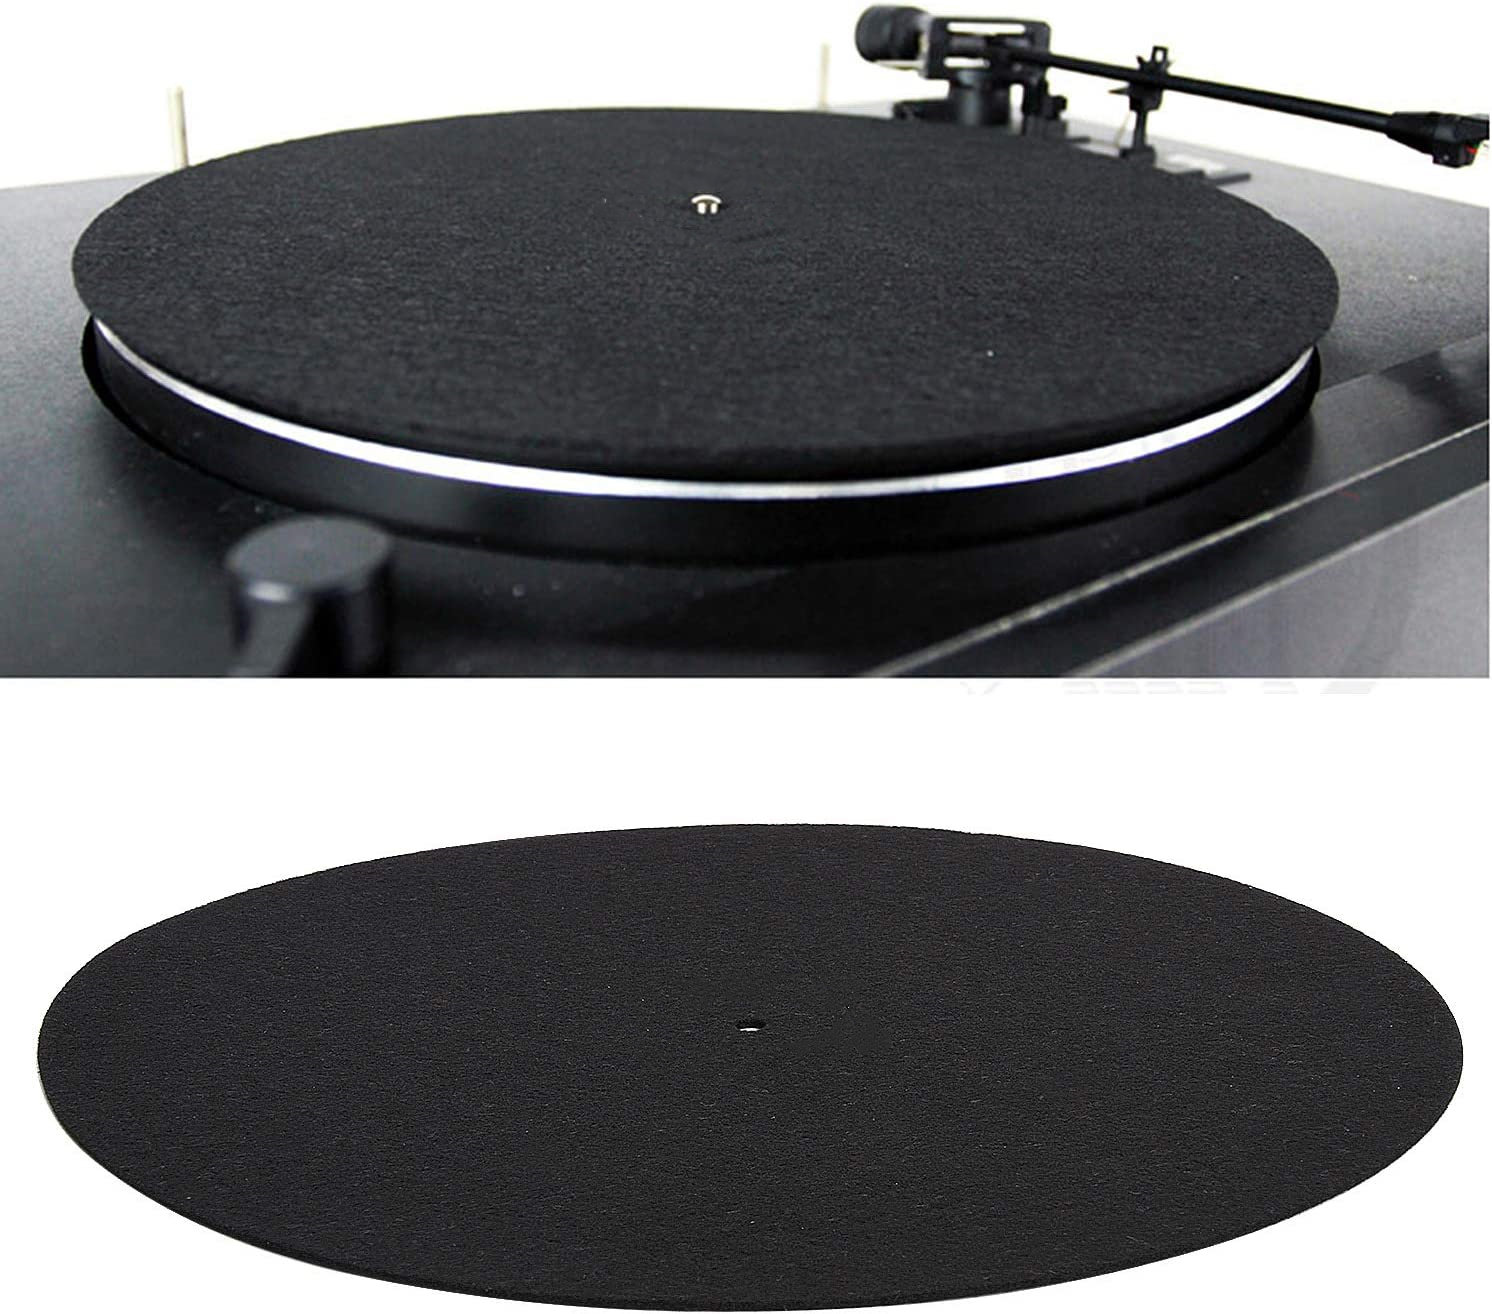 Slipmat for Record Player : 7 Steps (with Pictures) - Instructables